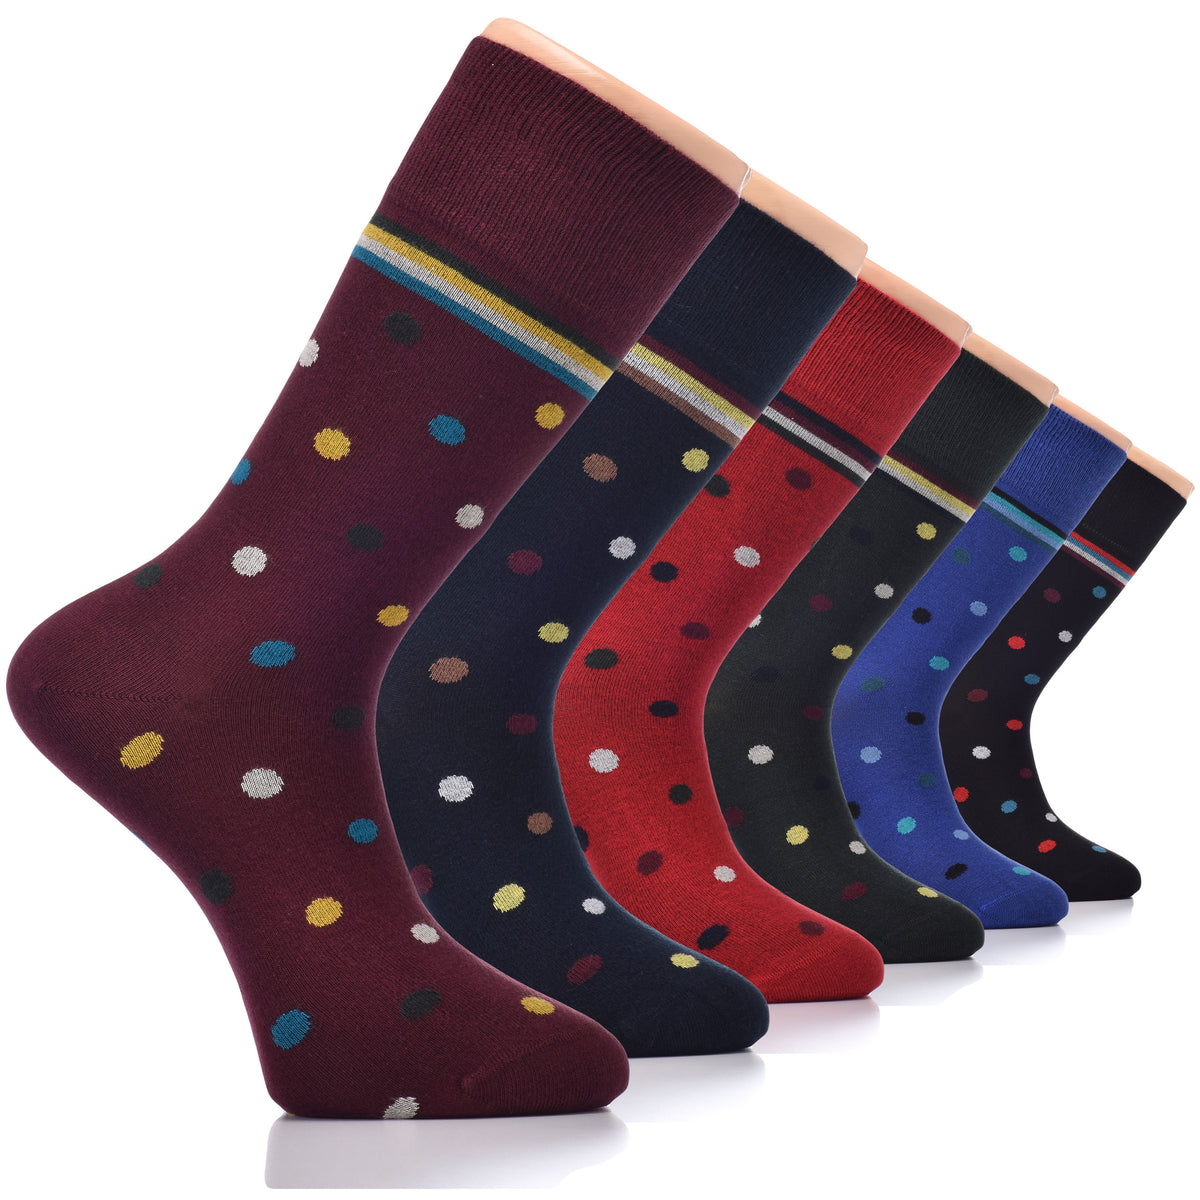 These crew socks feature a fancy cotton dress design, perfect for adding a touch of sophistication to any outfit.